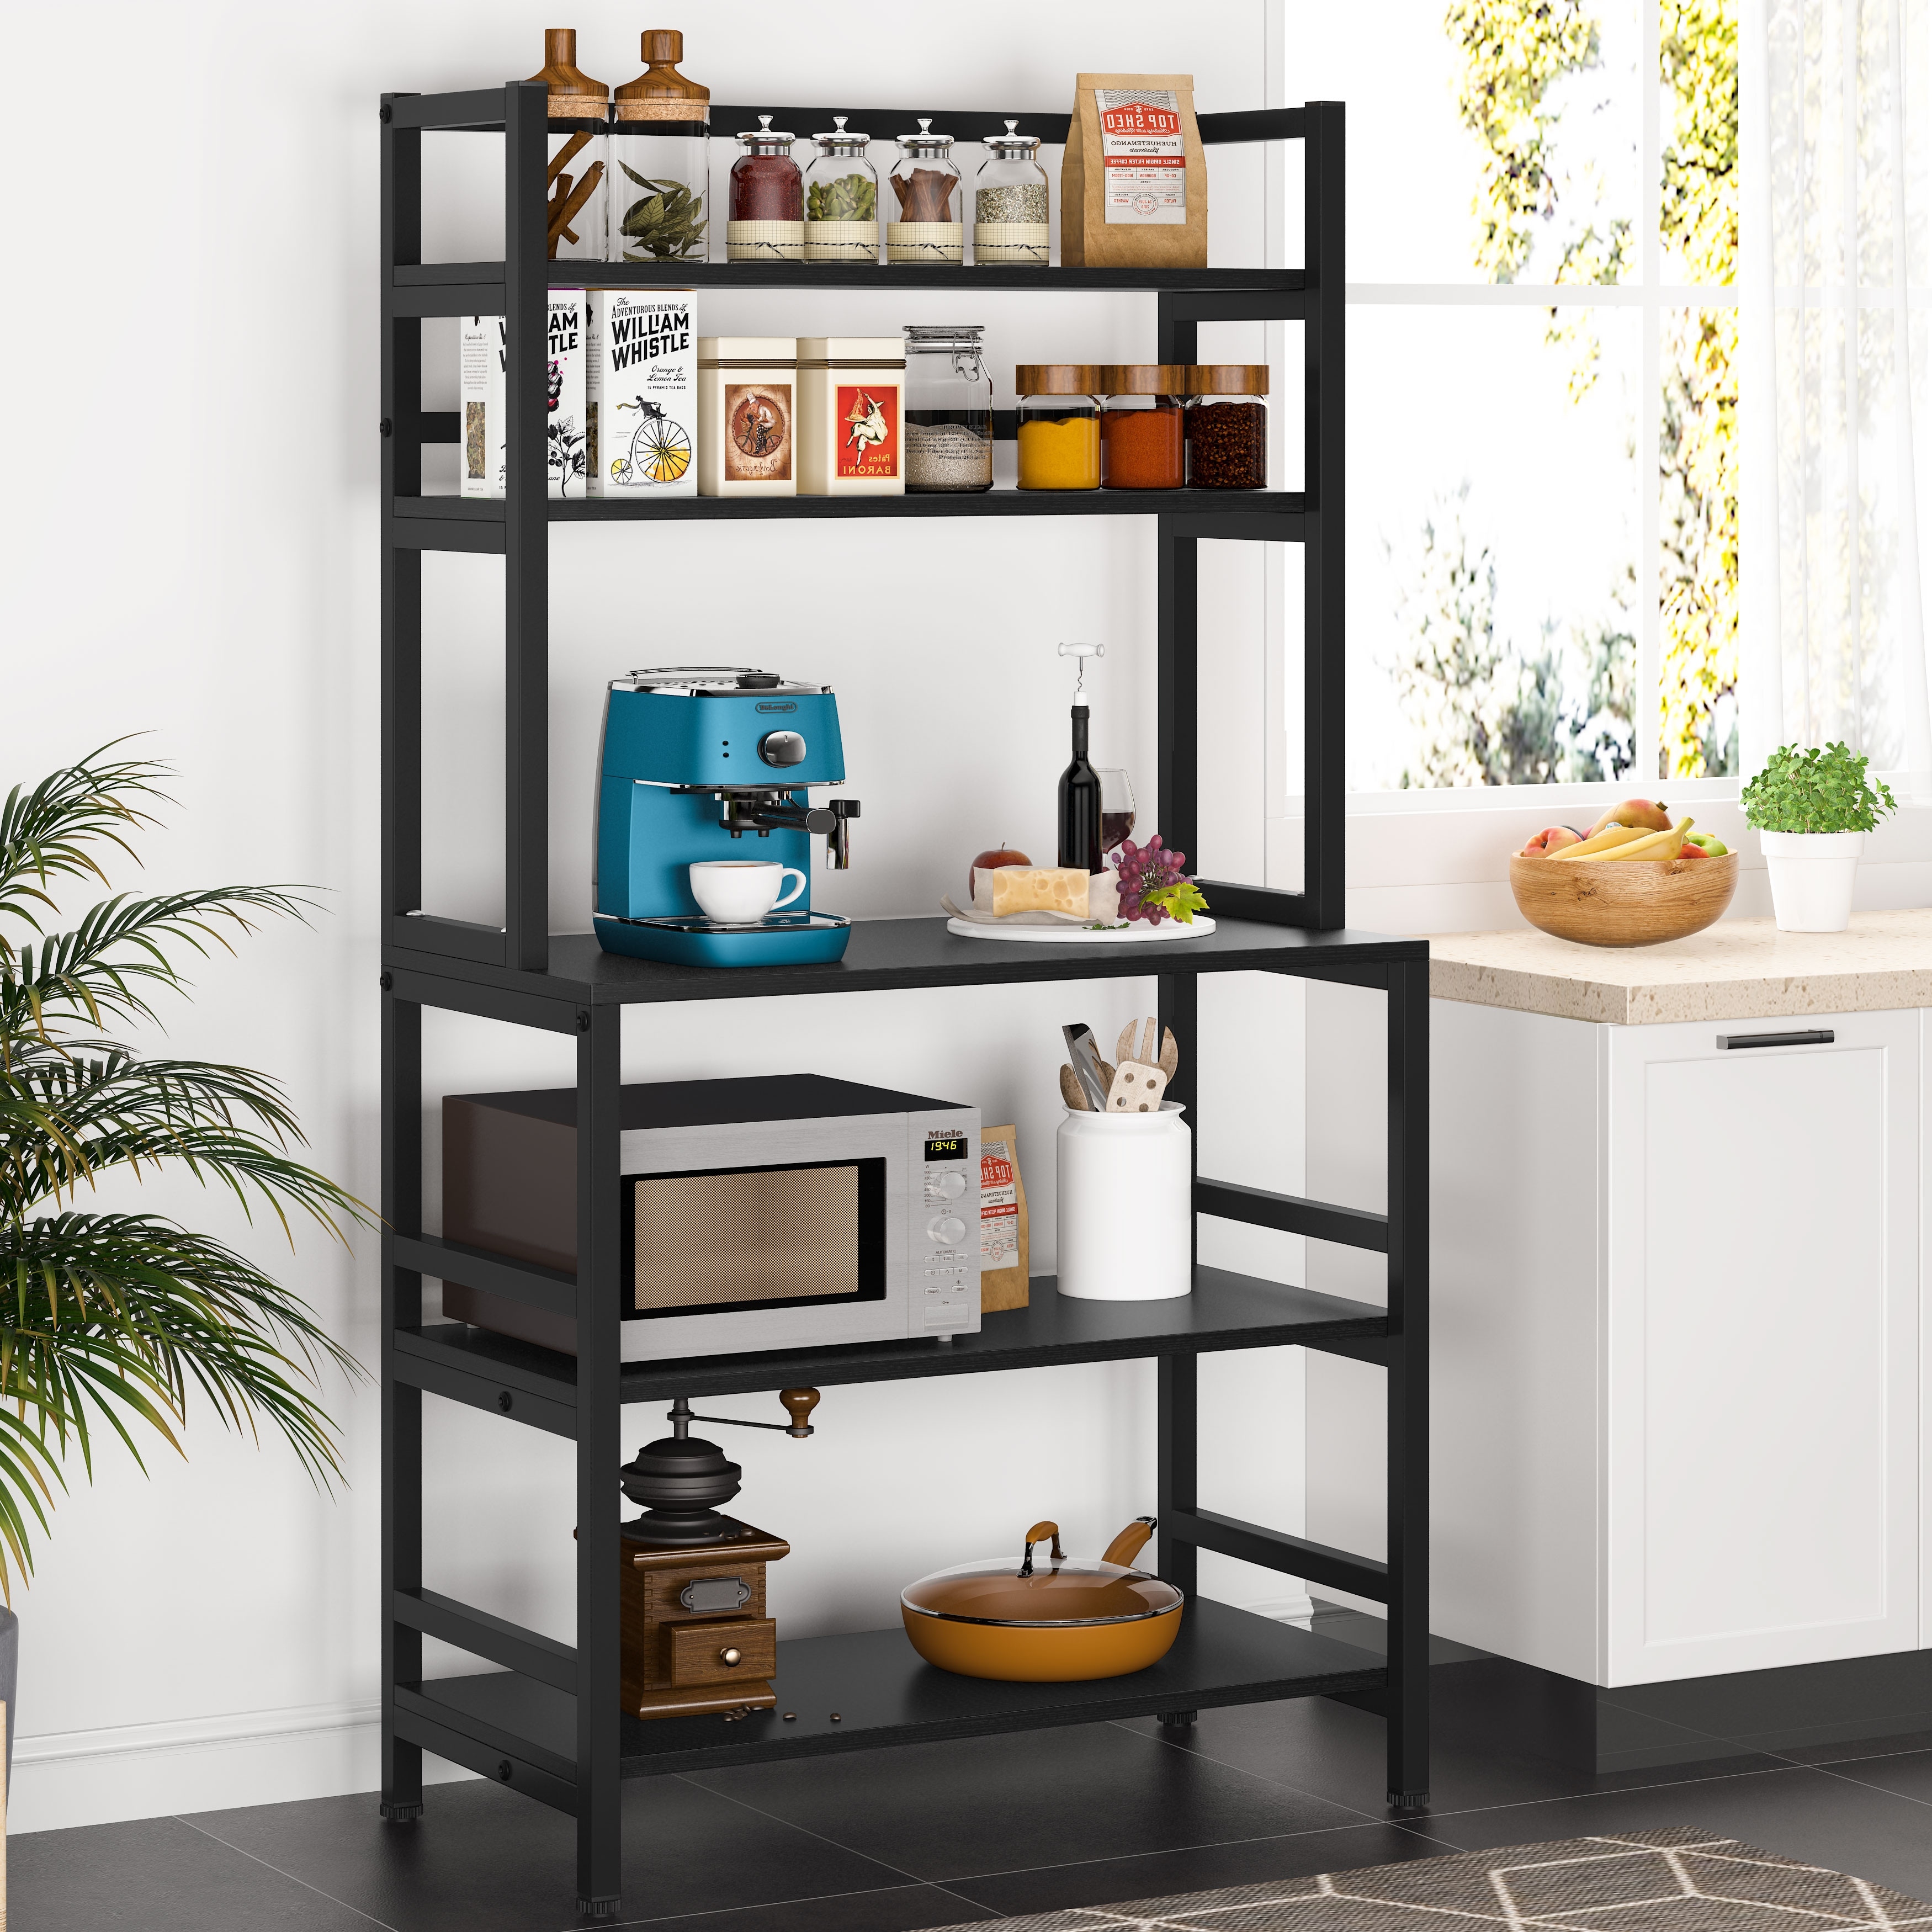 https://ak1.ostkcdn.com/images/products/is/images/direct/a08087af1607fea06a58e68f6093dc04ef59ac46/Brown--Black-5-Tier-Industrial-Kitchen-Bakers-Rack-Microwave-Stand-with-Hutch%2CWhite-Modern-Kitchen-Utility-Storage-Shelf.jpg